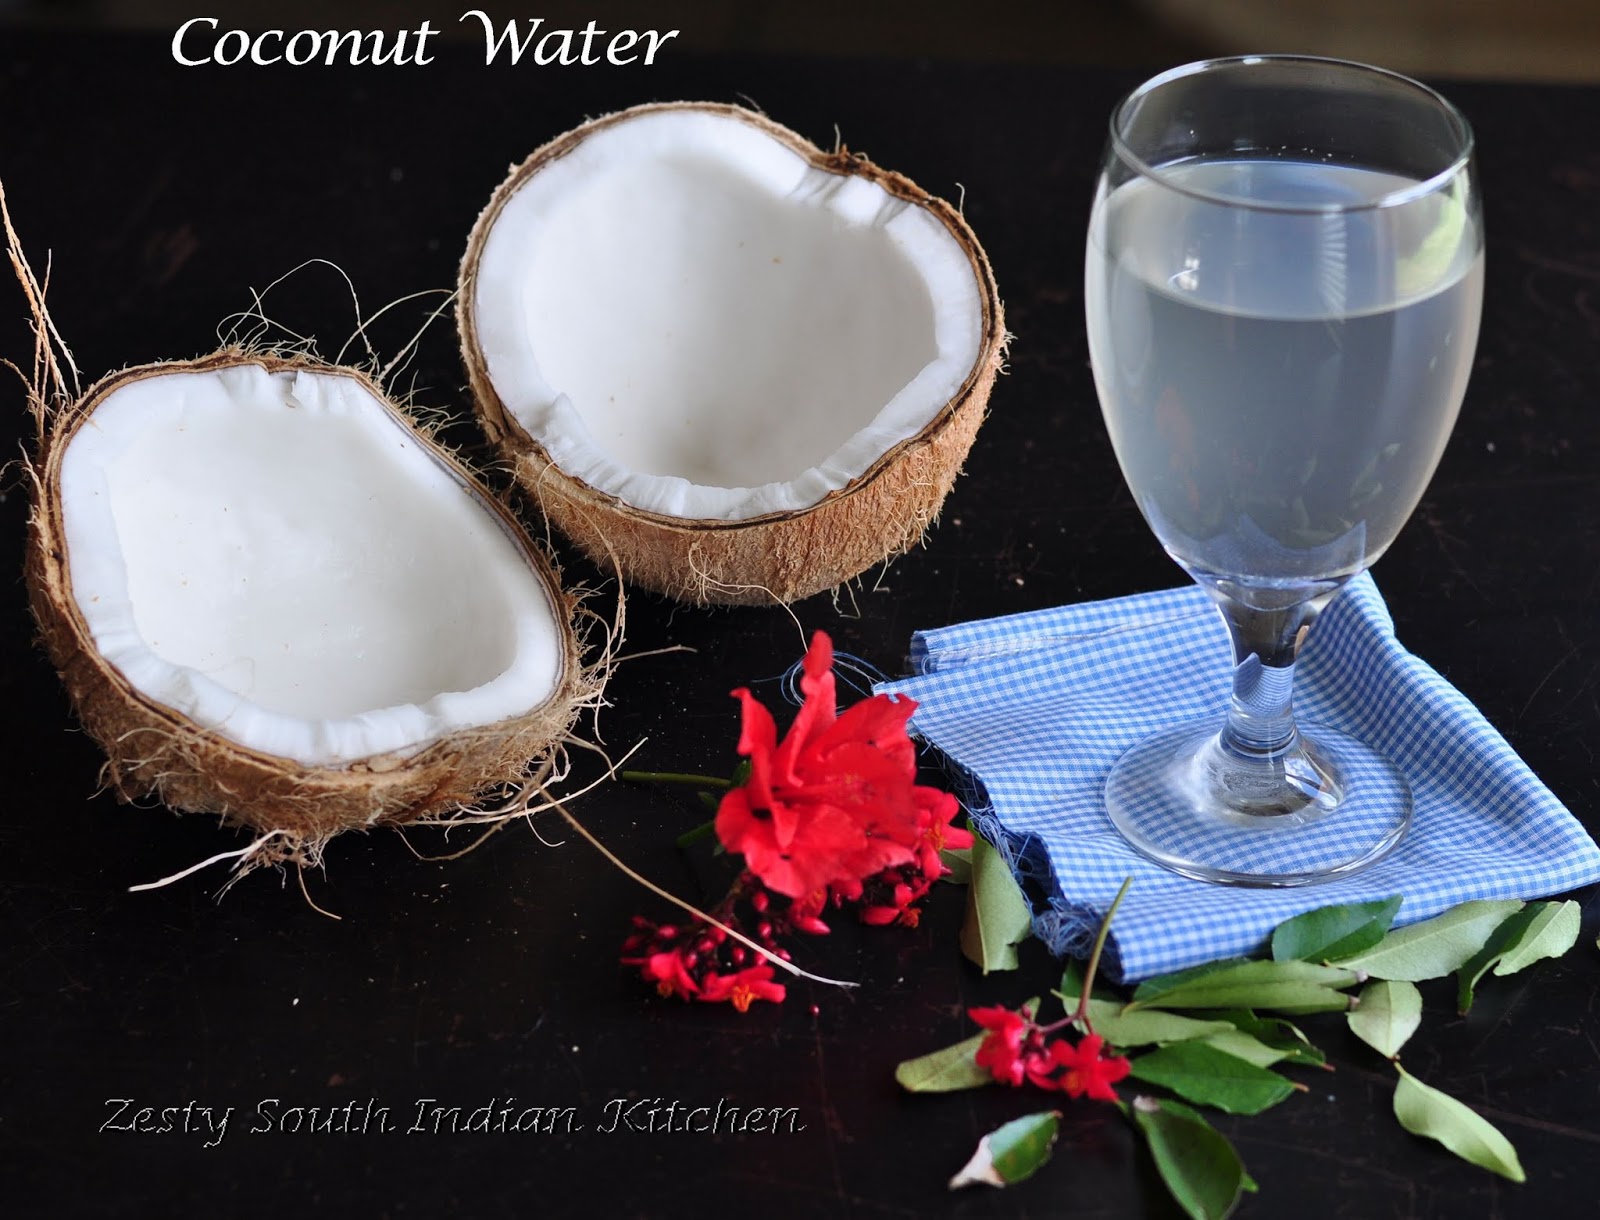 Coconut Water: Nature's drink - Zesty South Indian Kitchen